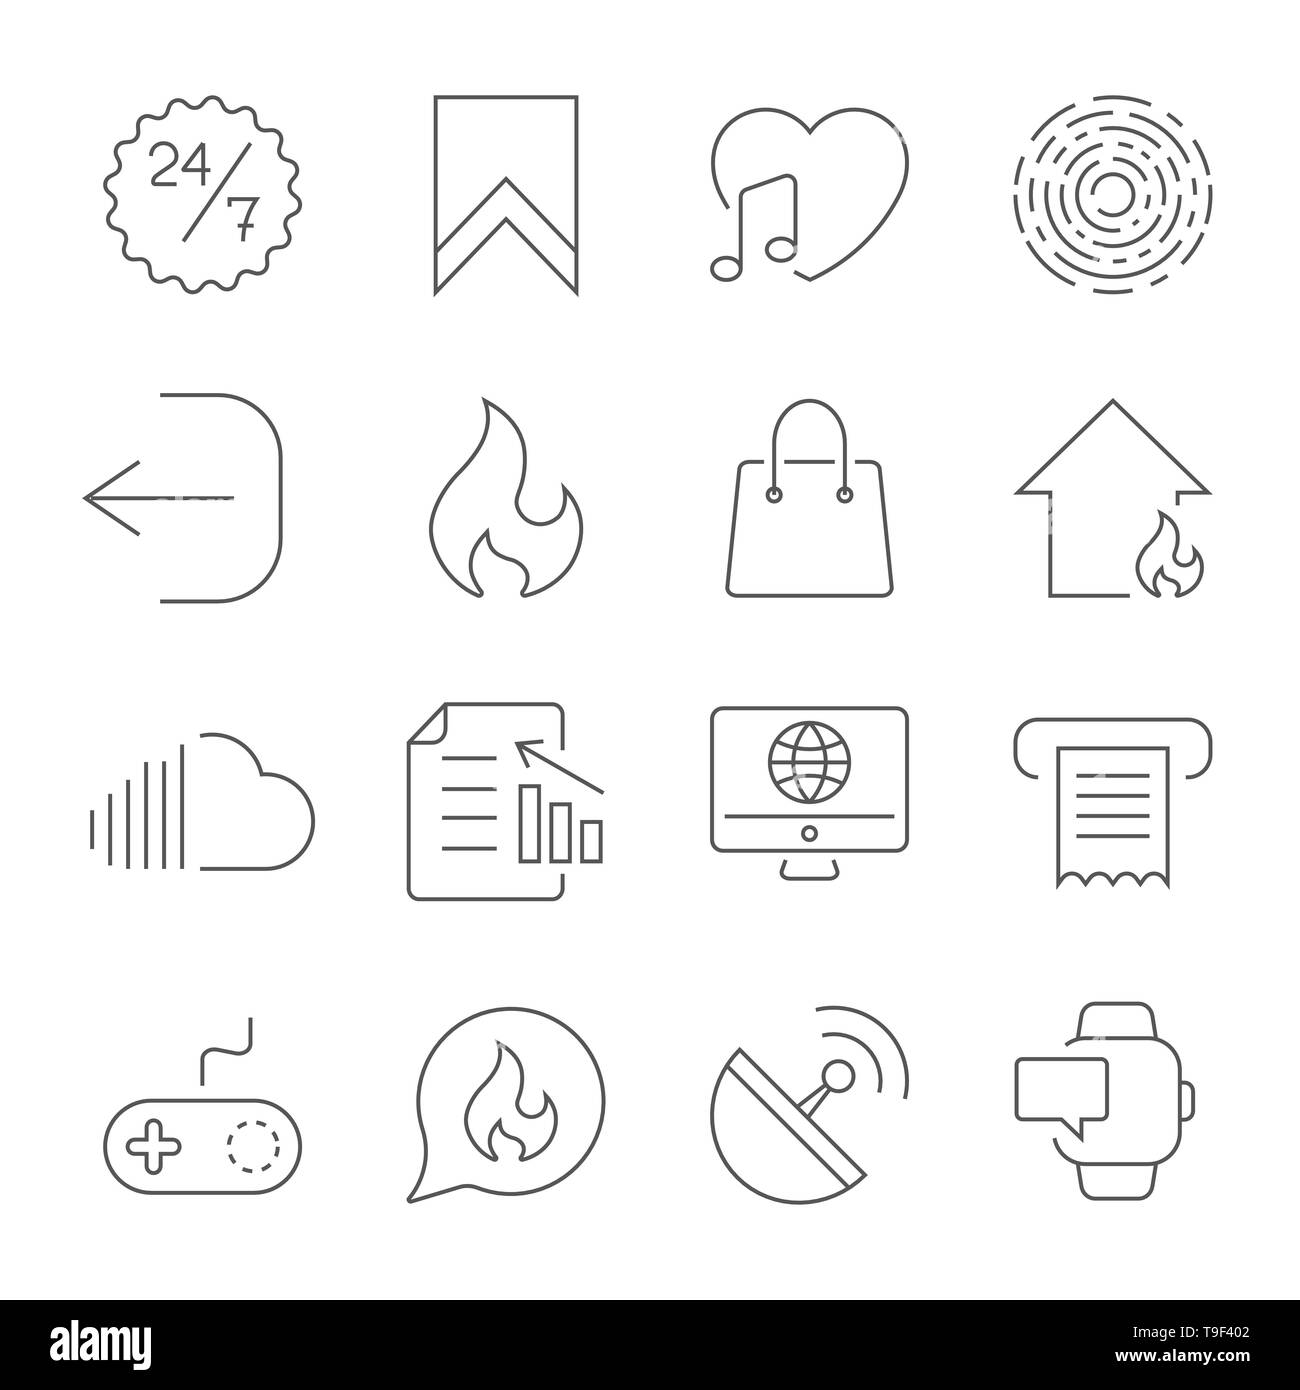 Simple UI icons for app, sites, programs. Different UI icons. Simple pictograms on white background. Editable Storke. Stock Vector